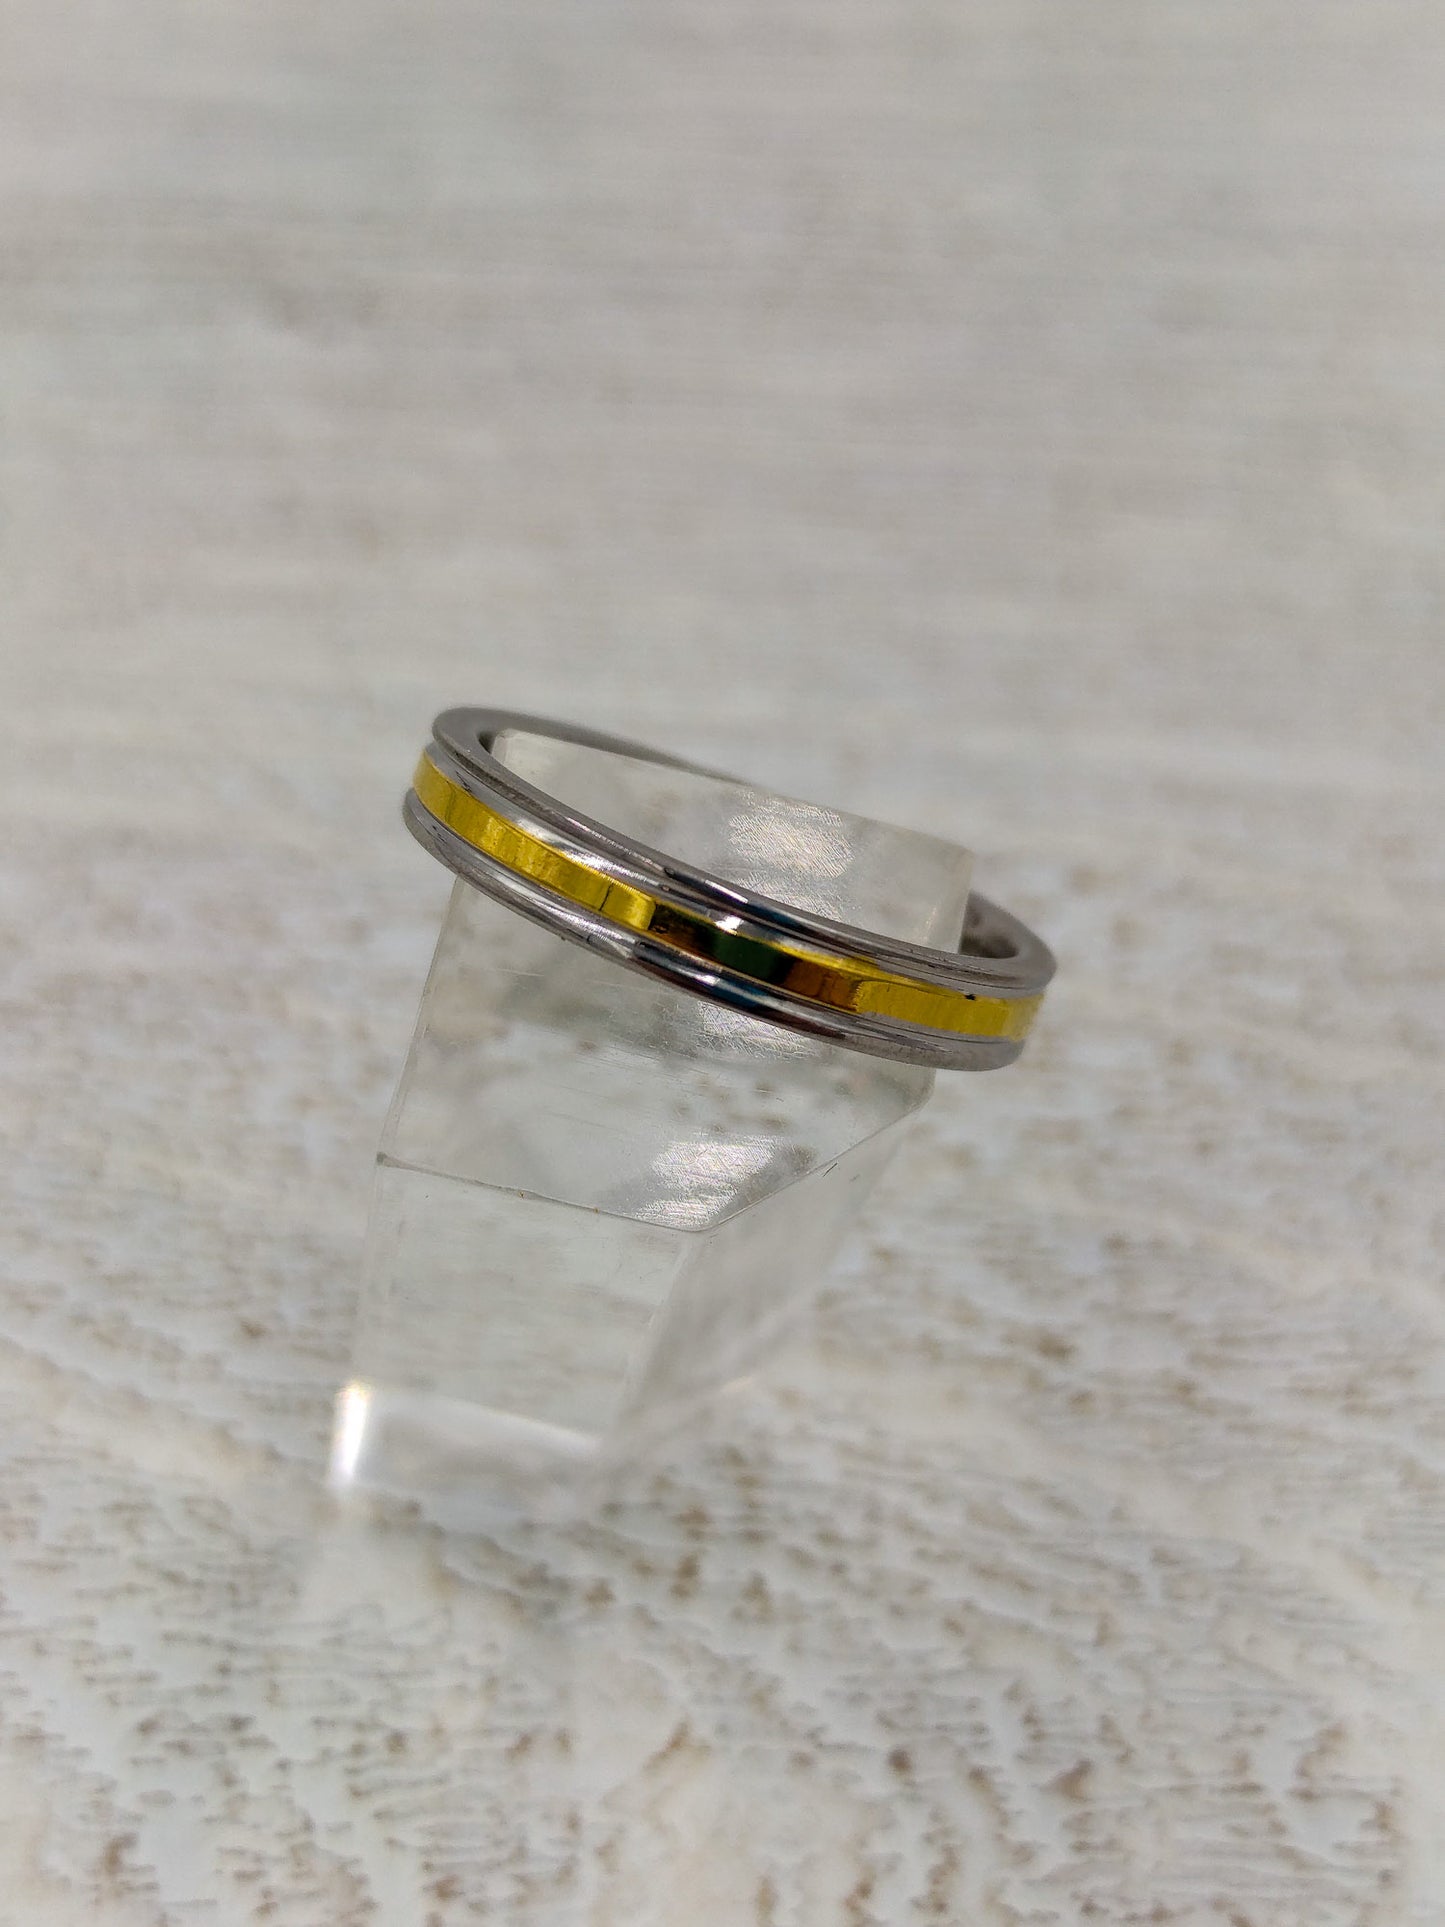 Steel wedding ring with gold stripe - R072